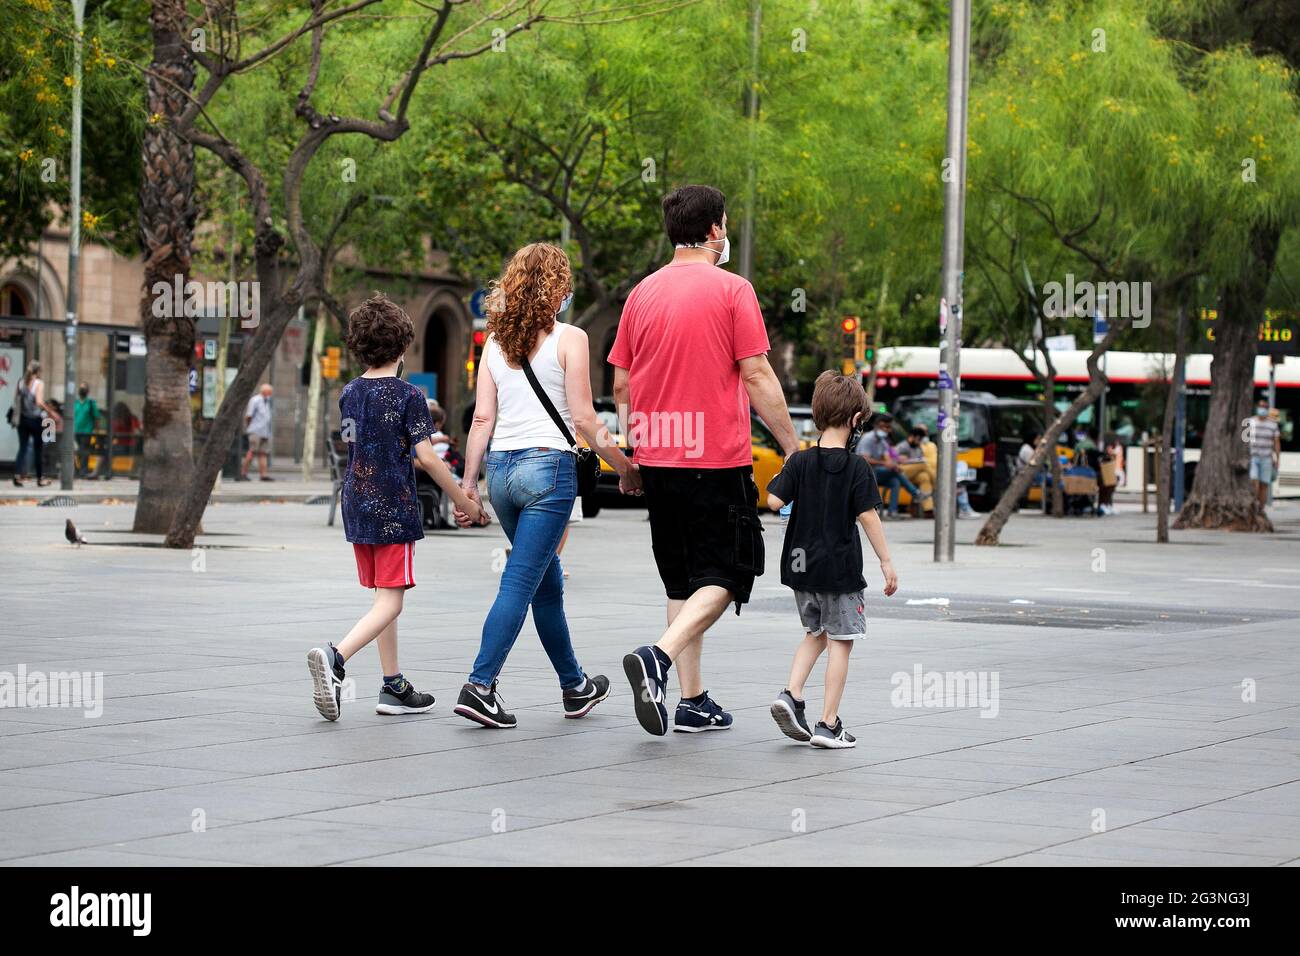 Family of four walking hand in hand, Barcelona, Spain. Stock Photo